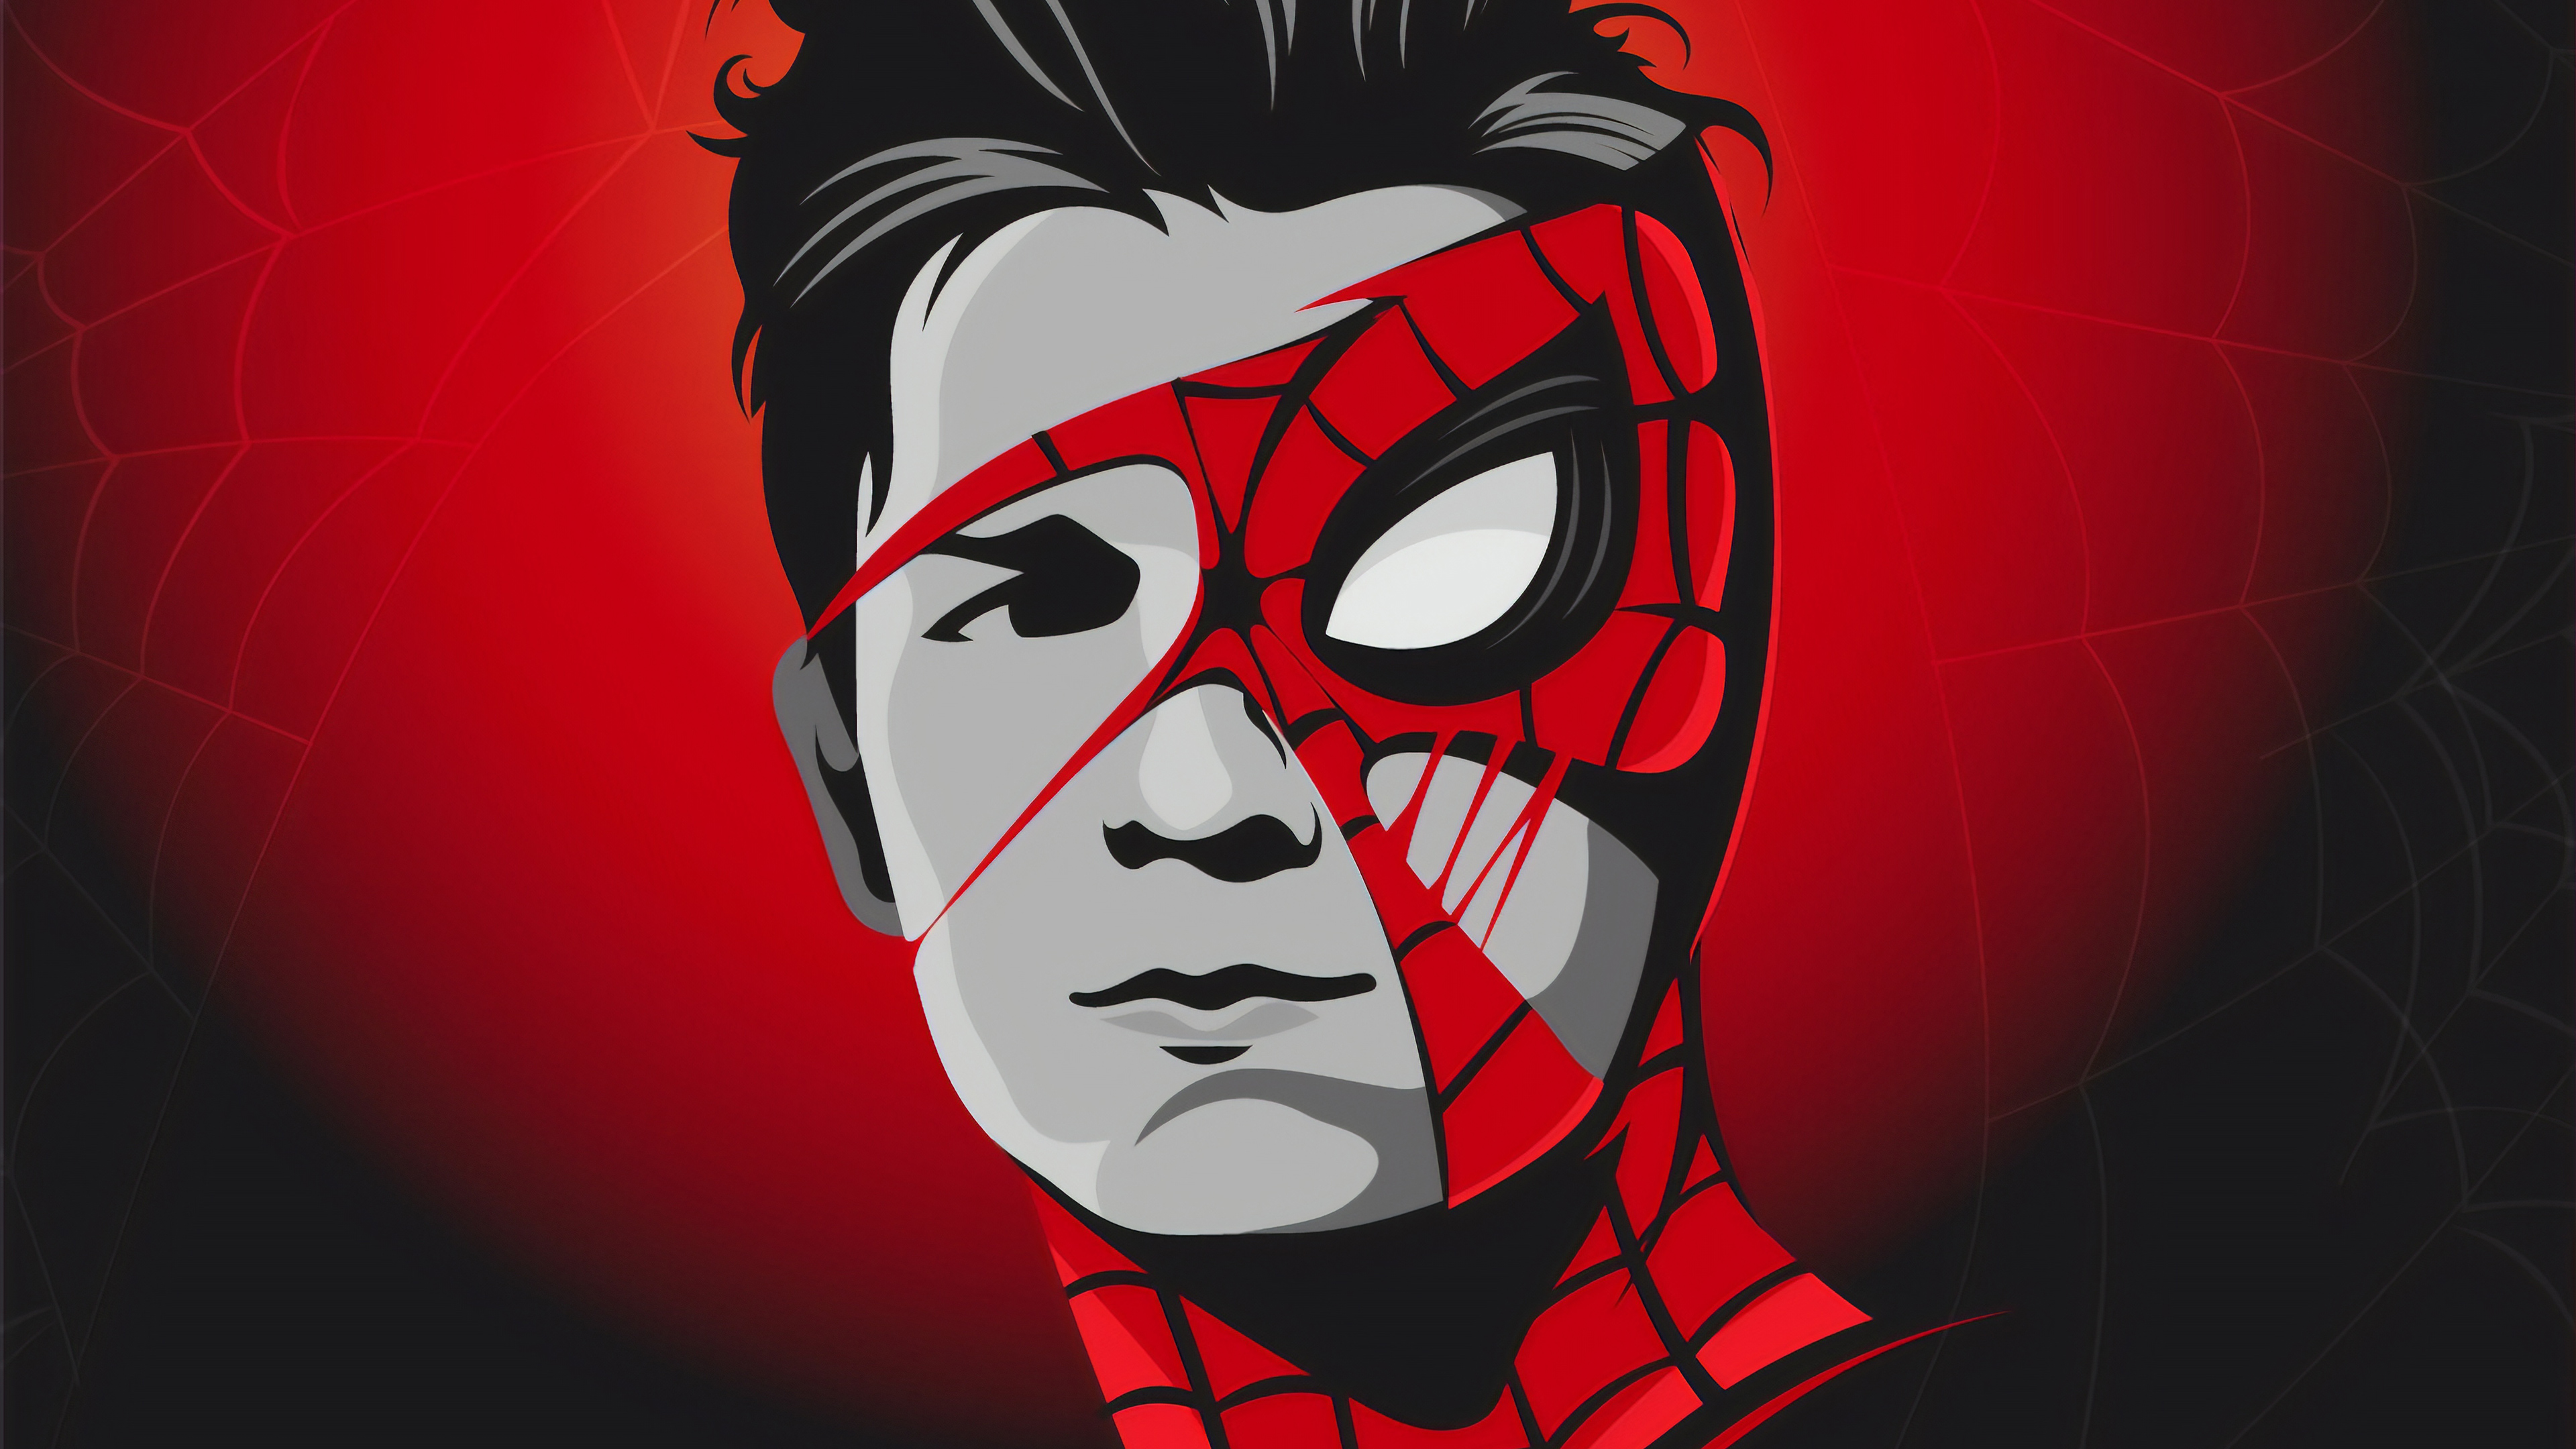 2048x2048 Tom Holland Mask 4k Ipad Air Hd 4k Wallpapers Images Backgrounds Photos And Pictures